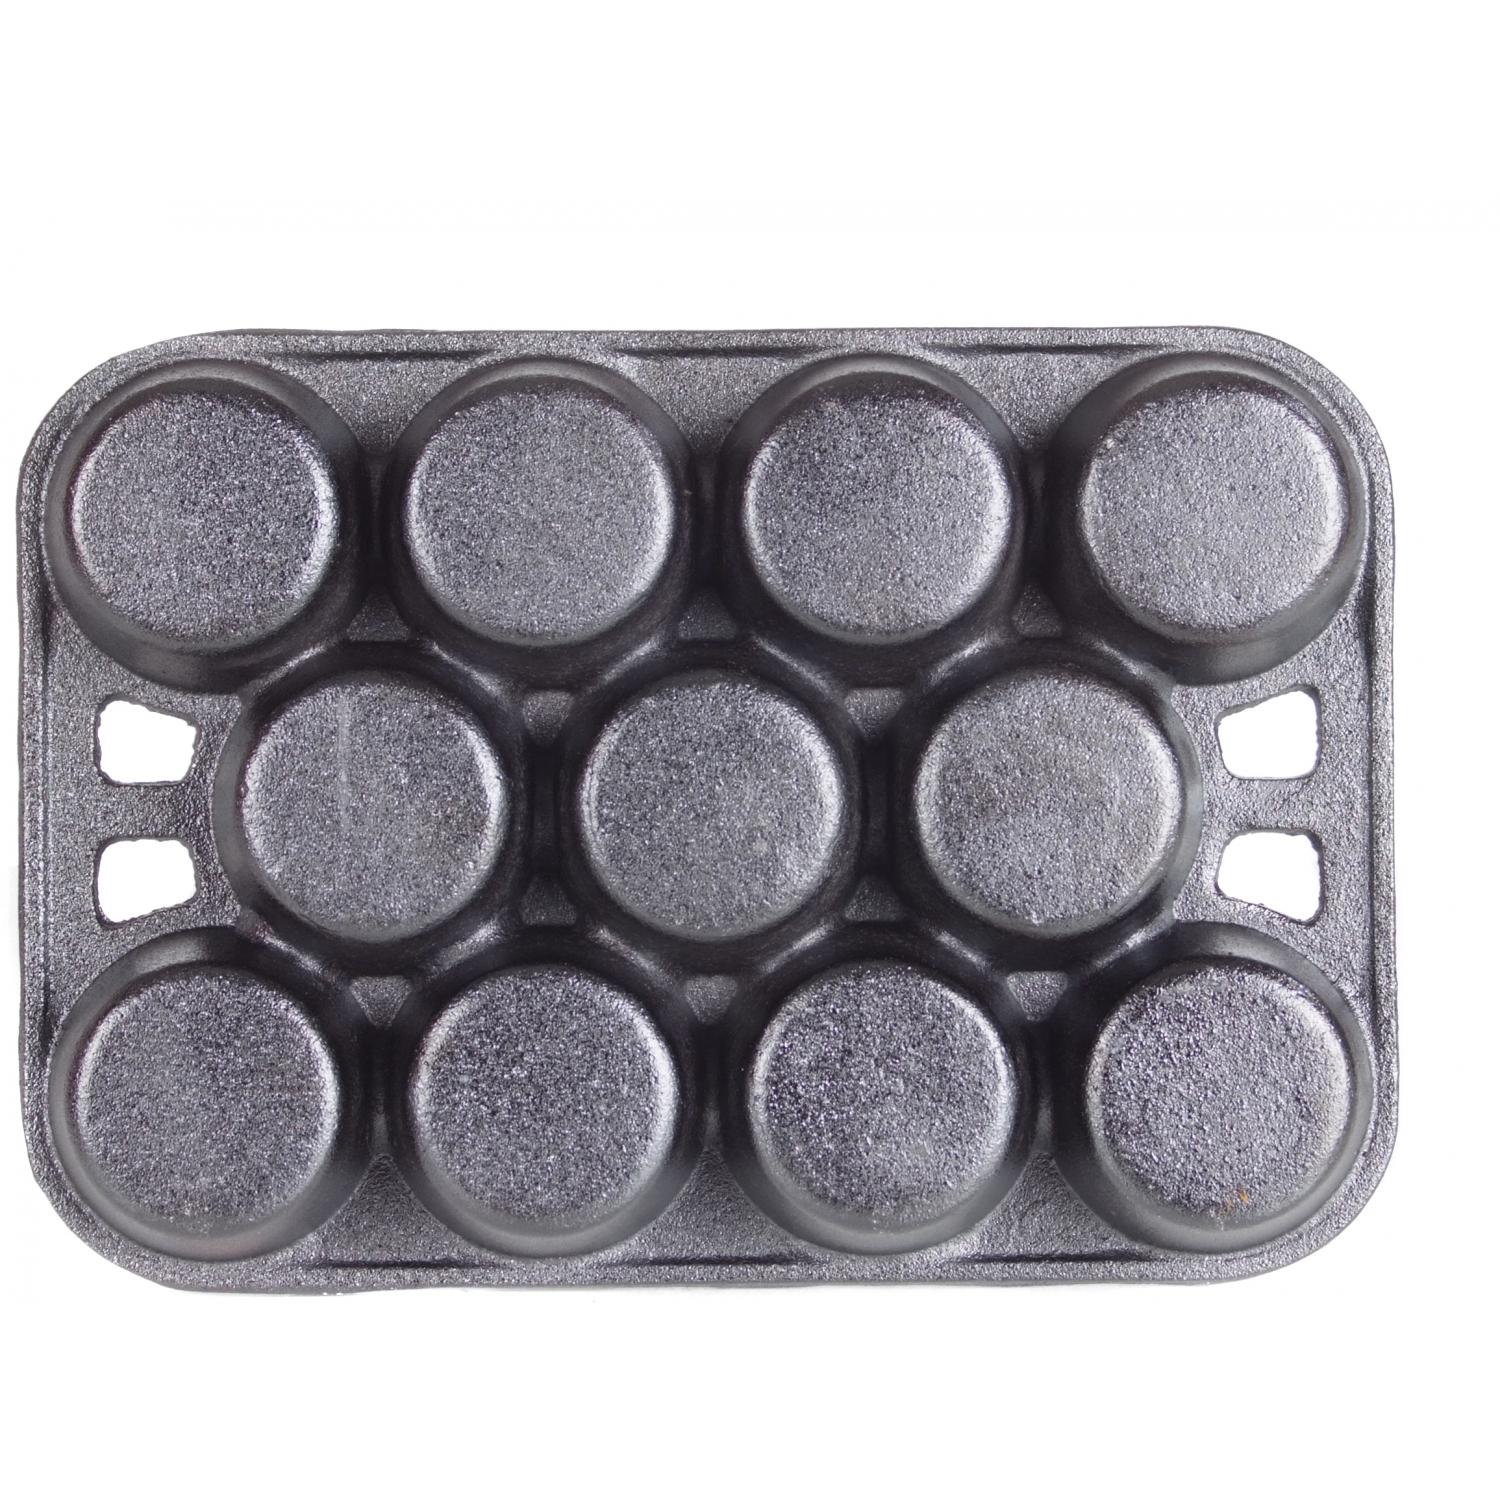 10492ES - Muffin Pan 11 Hole - Cast Iron ·